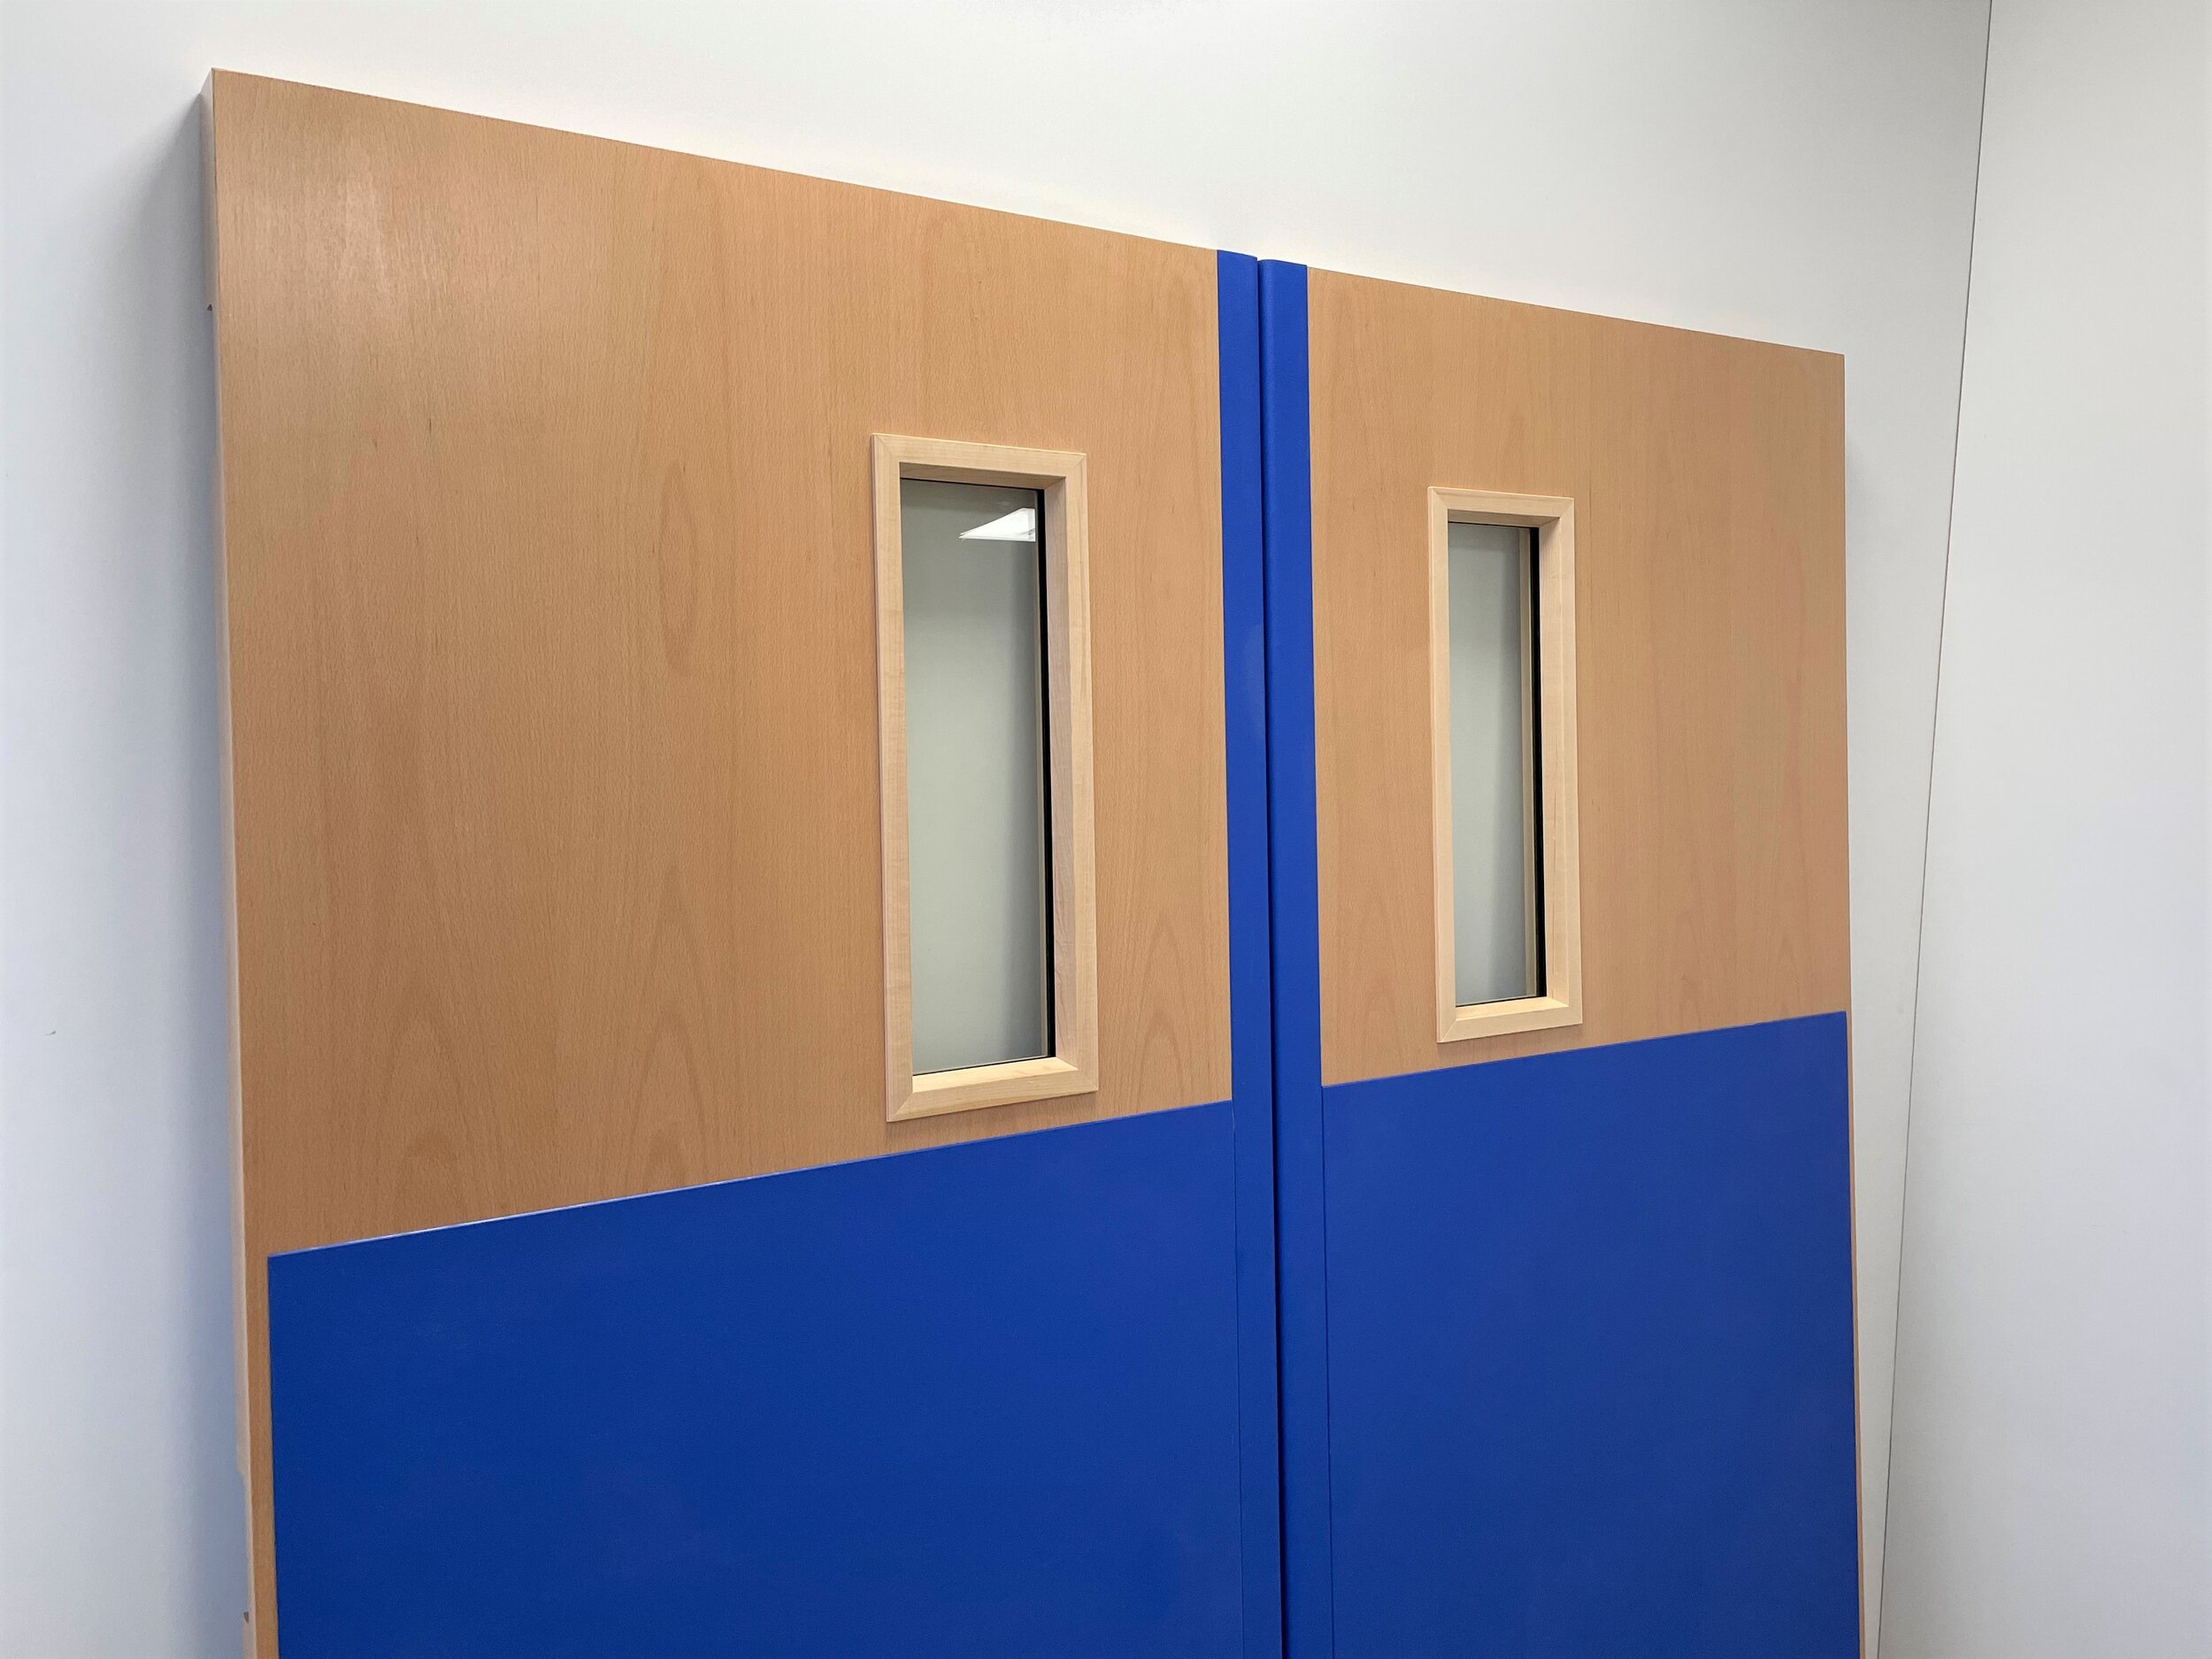 Pair of FD60 doors equipped with Yeoman protection panels and edge protection for the Birmingham Children's Hospital 